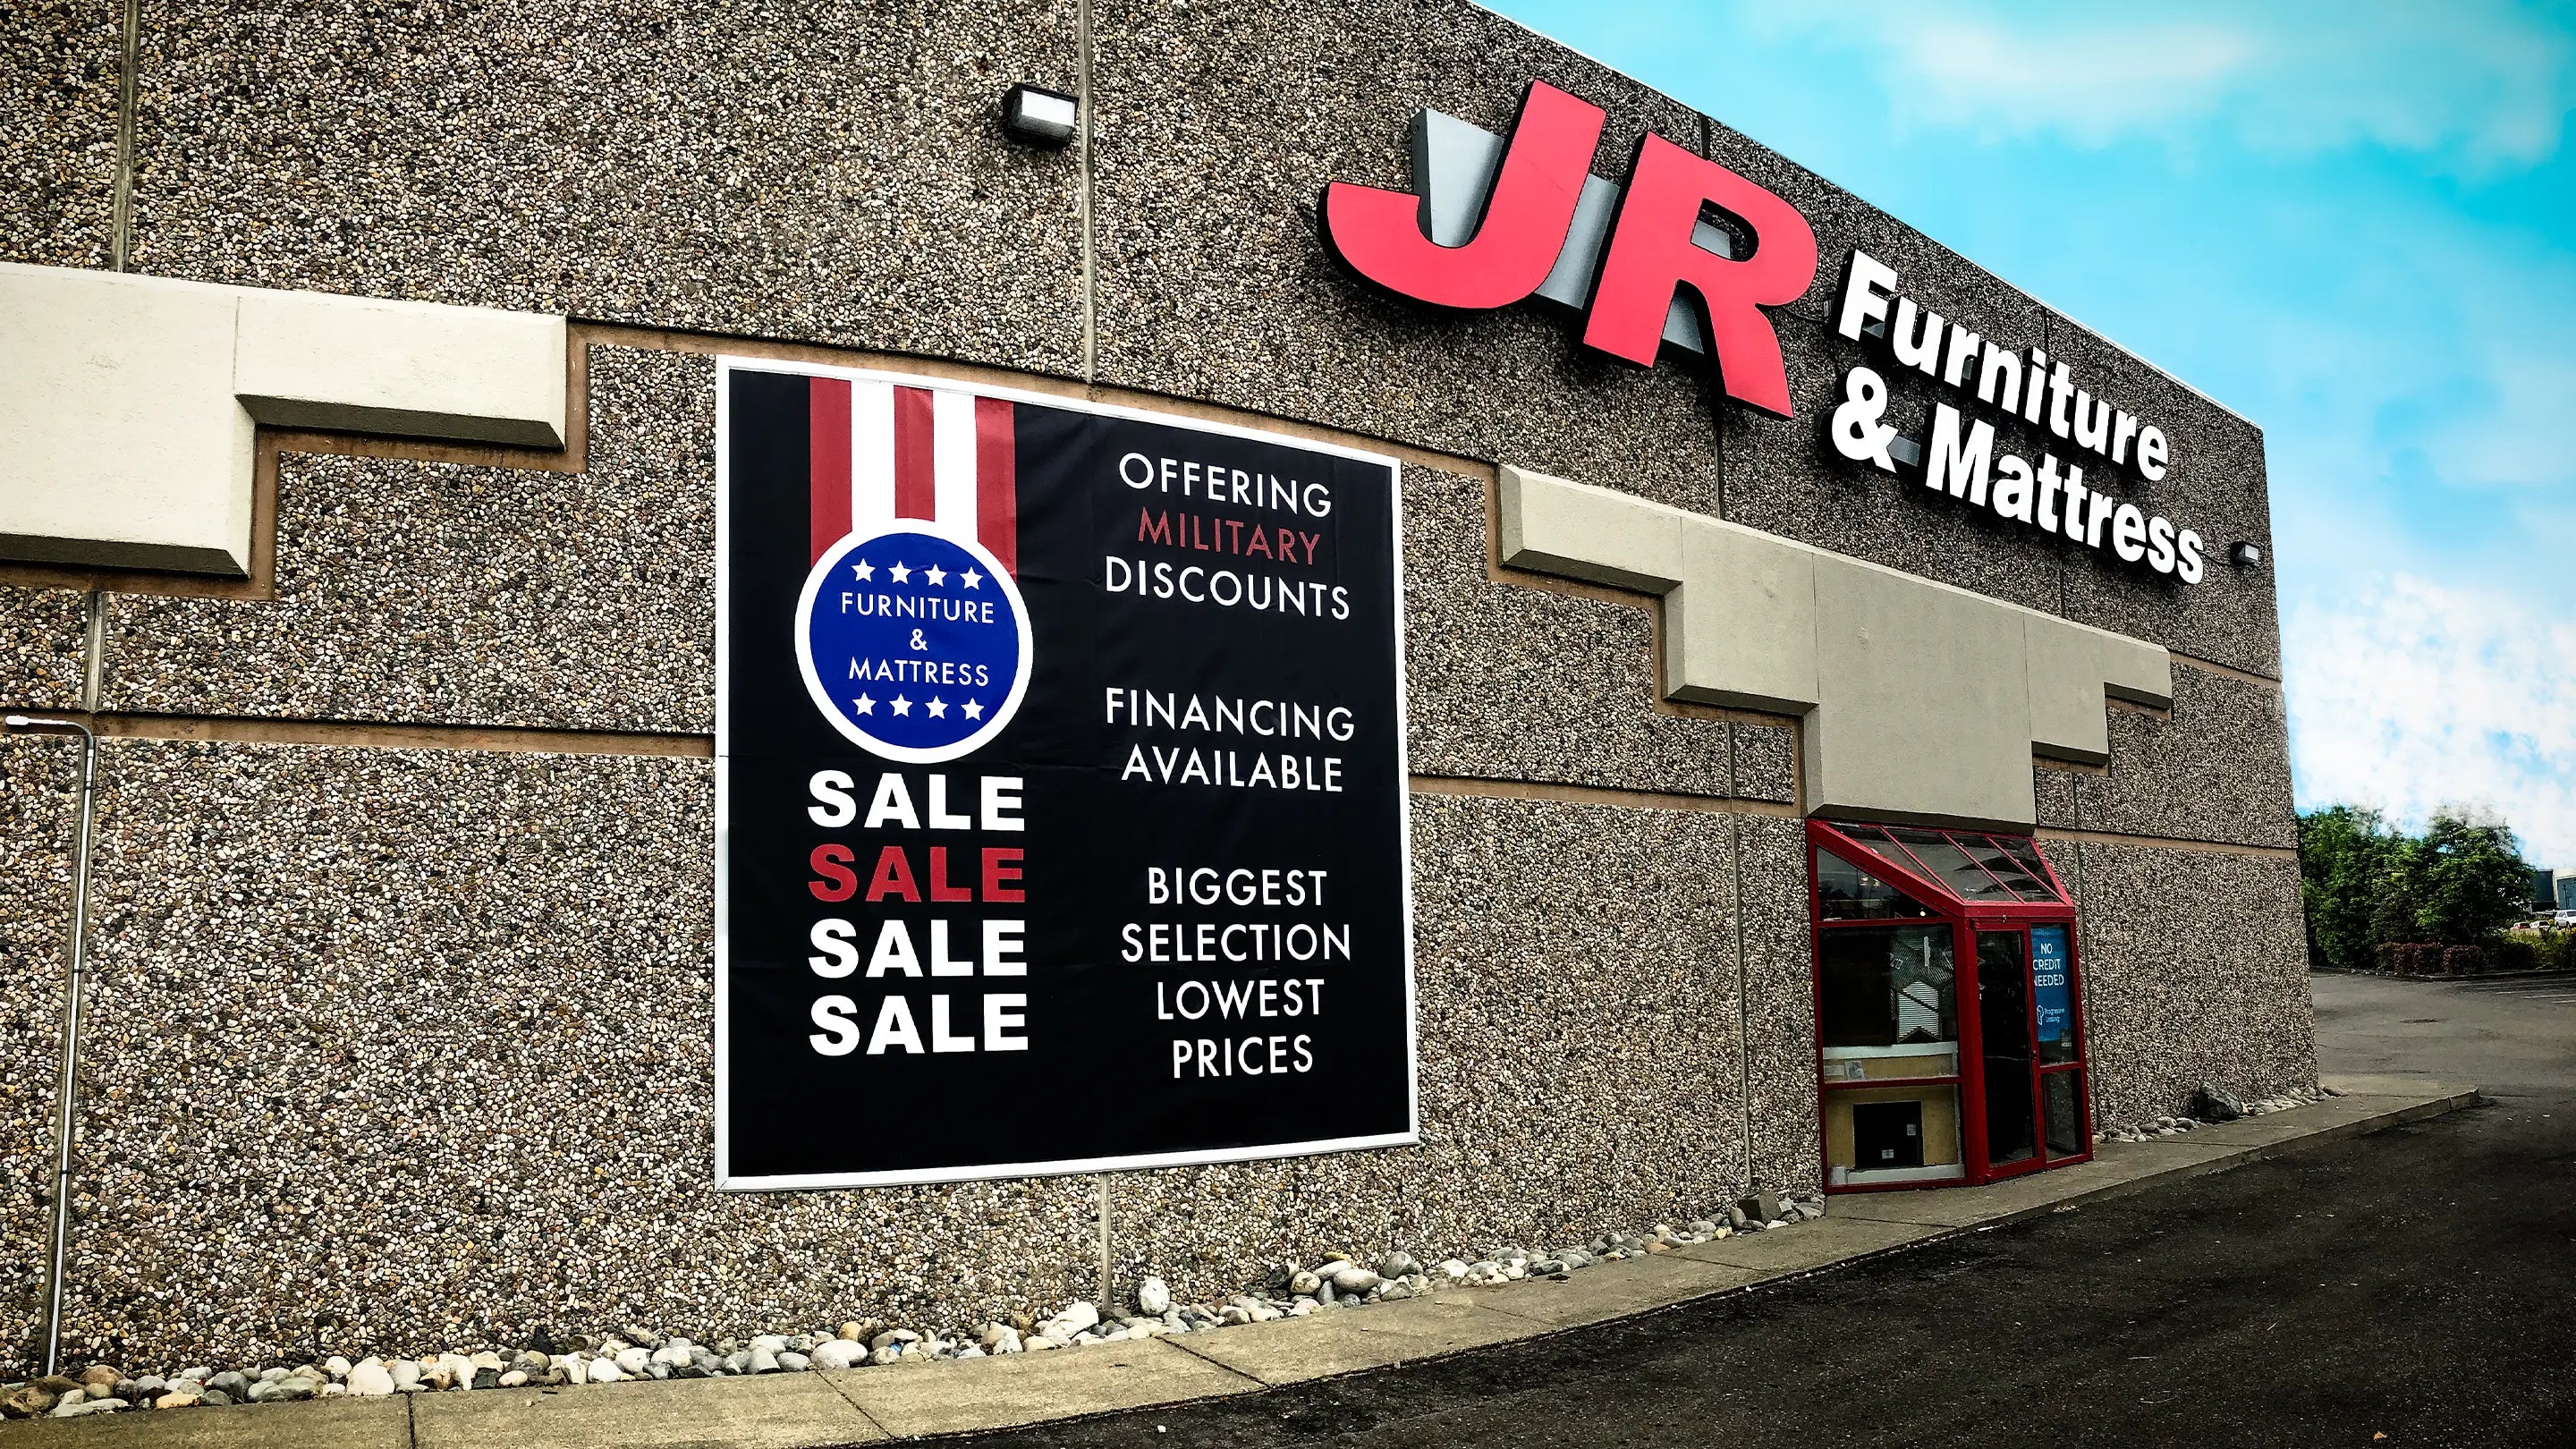 Large banner framing system we designed and made for JR Furniture in Lakewood, WA. These grand-format banners were designed and printed in-house and installed by our banner installation team.